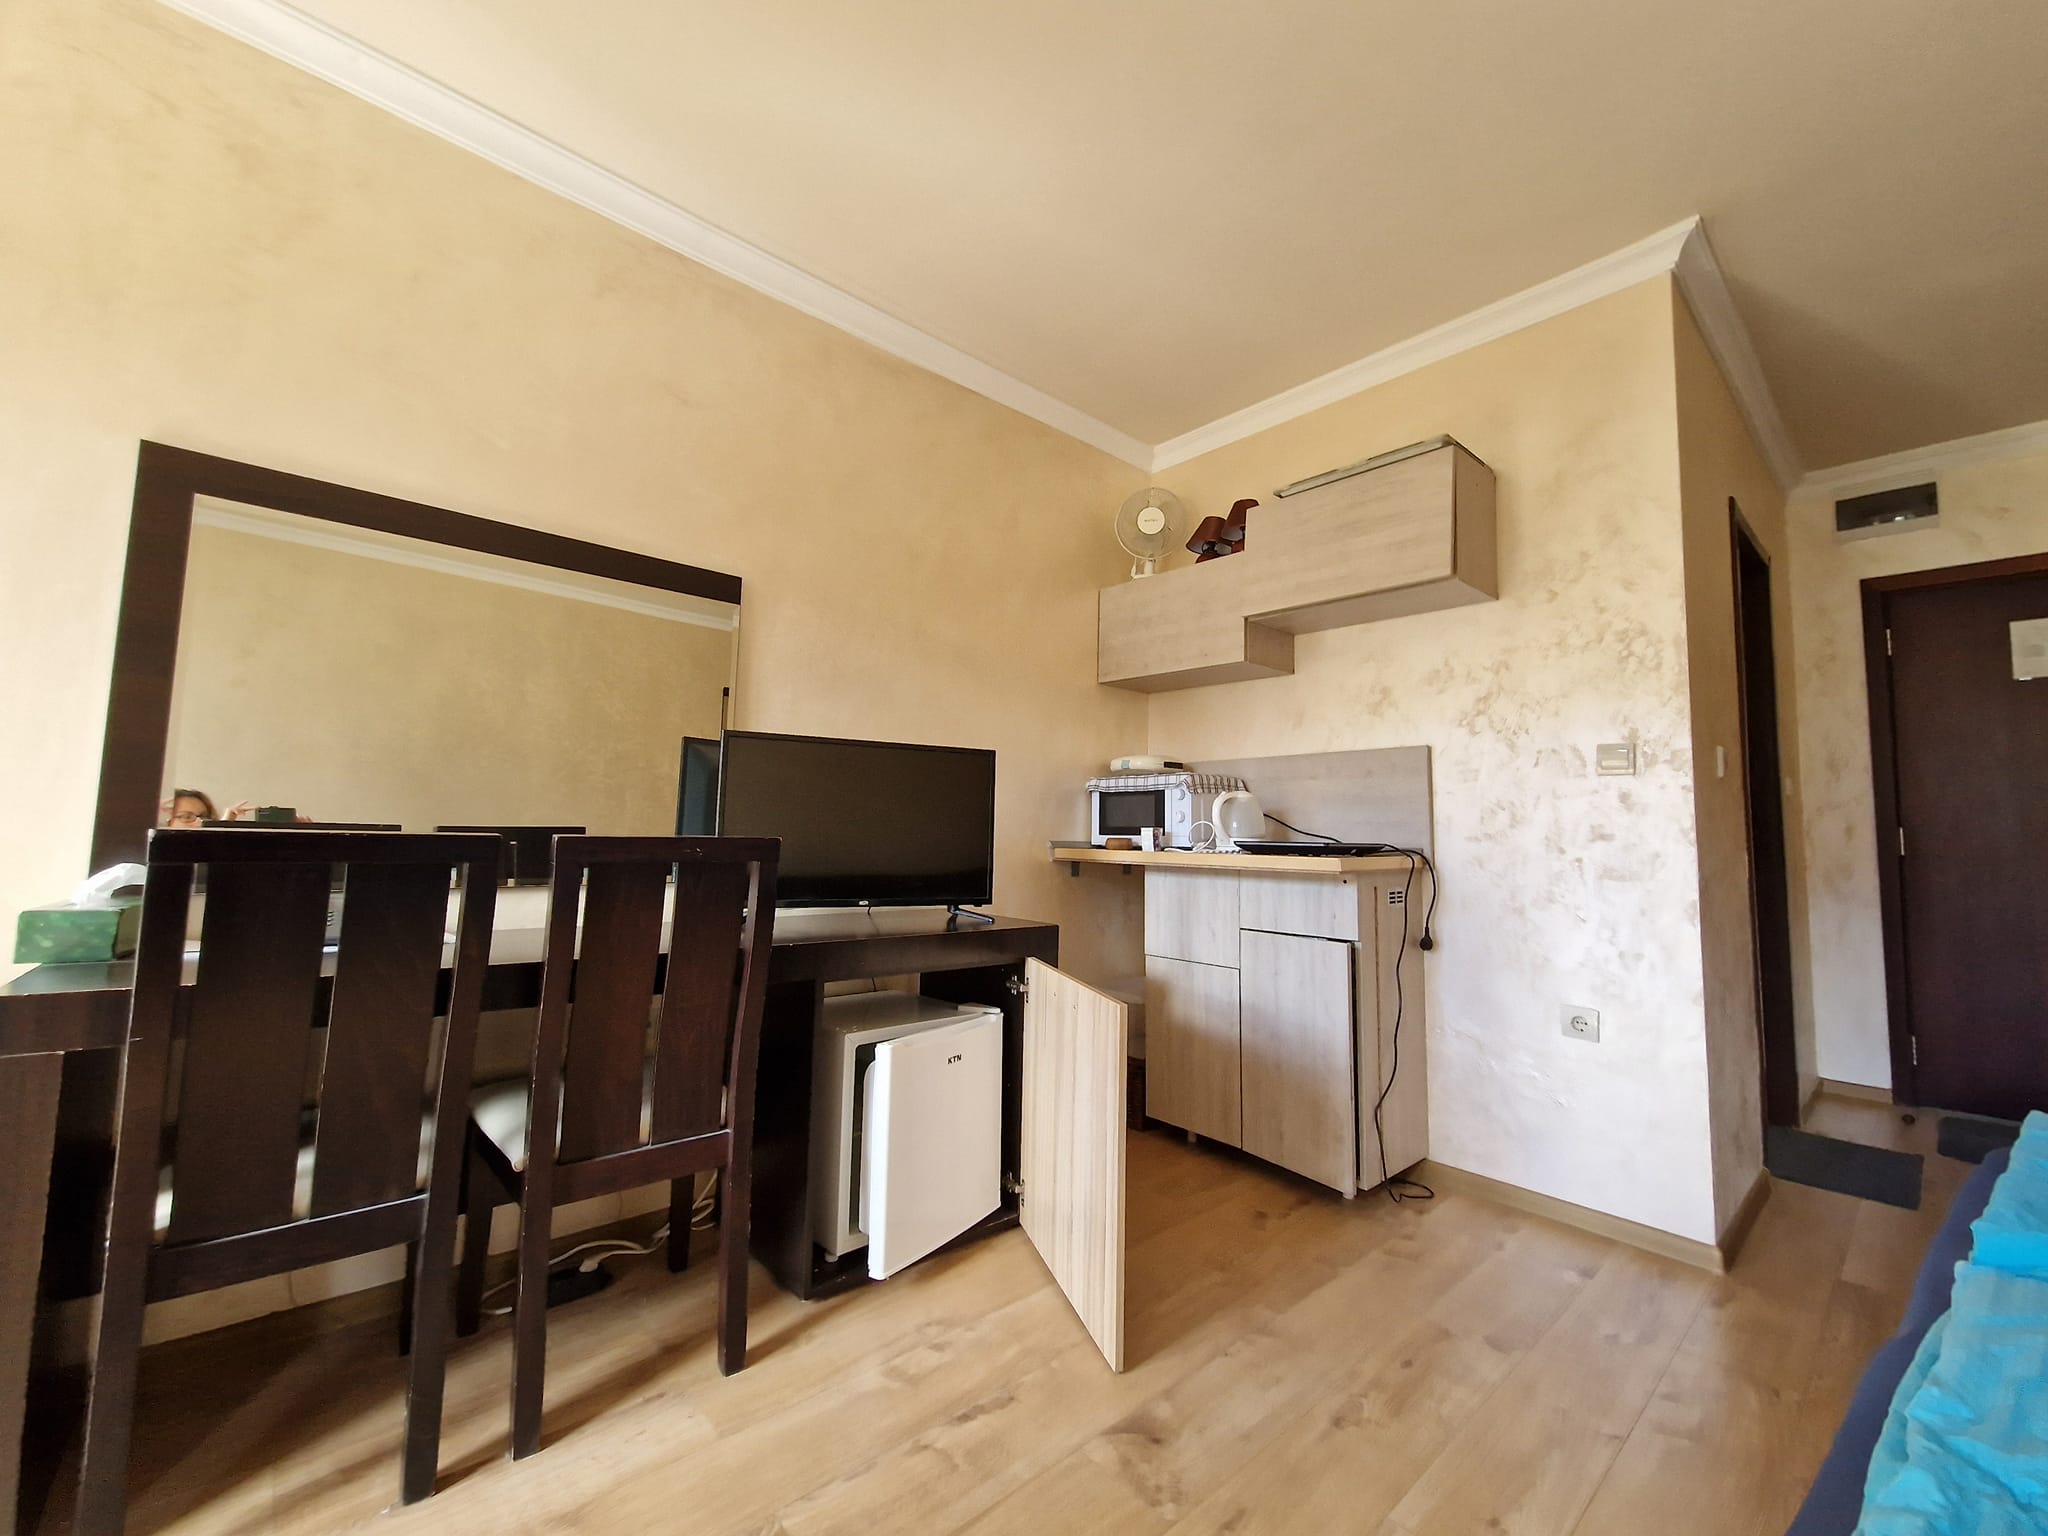 Furnished studio with a south-facing balcony and a beautiful view of the Pirin Mountains